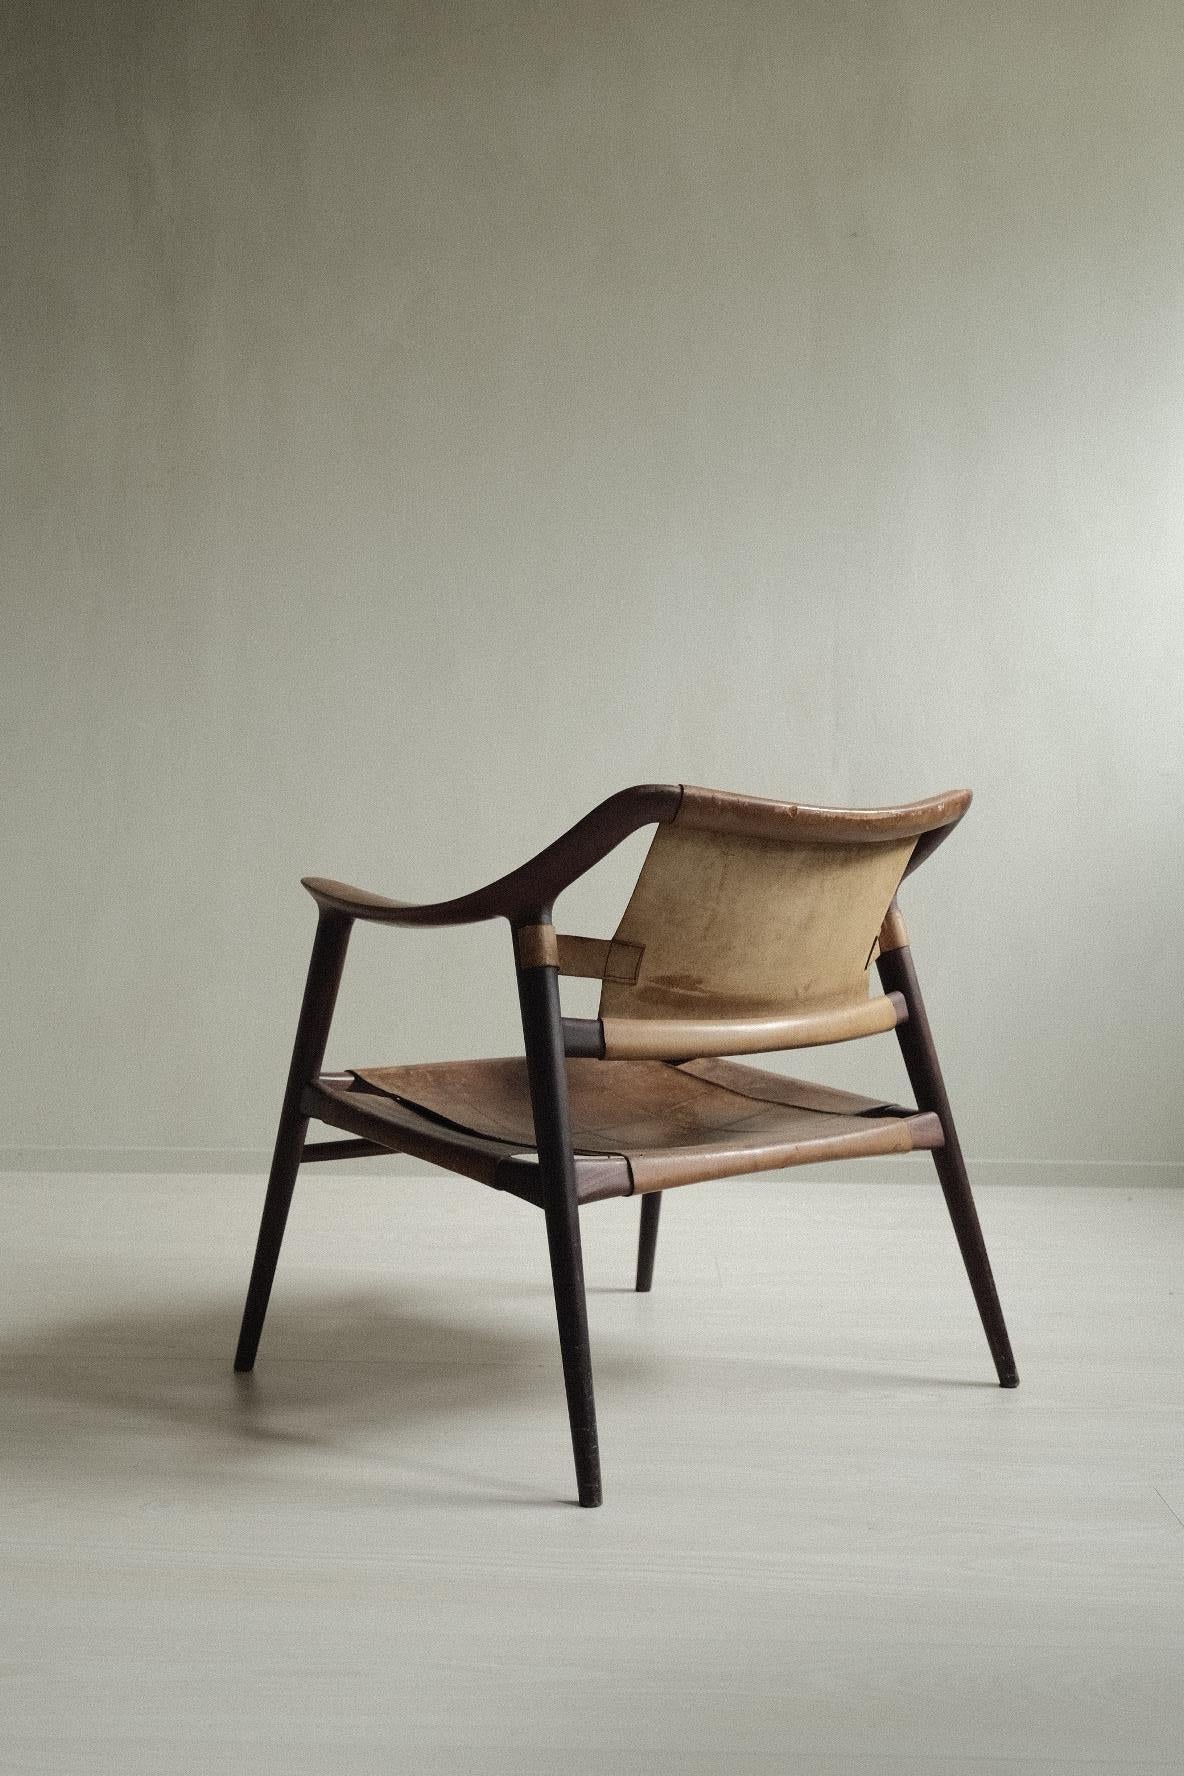 19th Century Bambi 56/2 by Sigurd Resell for Gustav Bahus, Teak & Saddle Leather, Norway, 50s